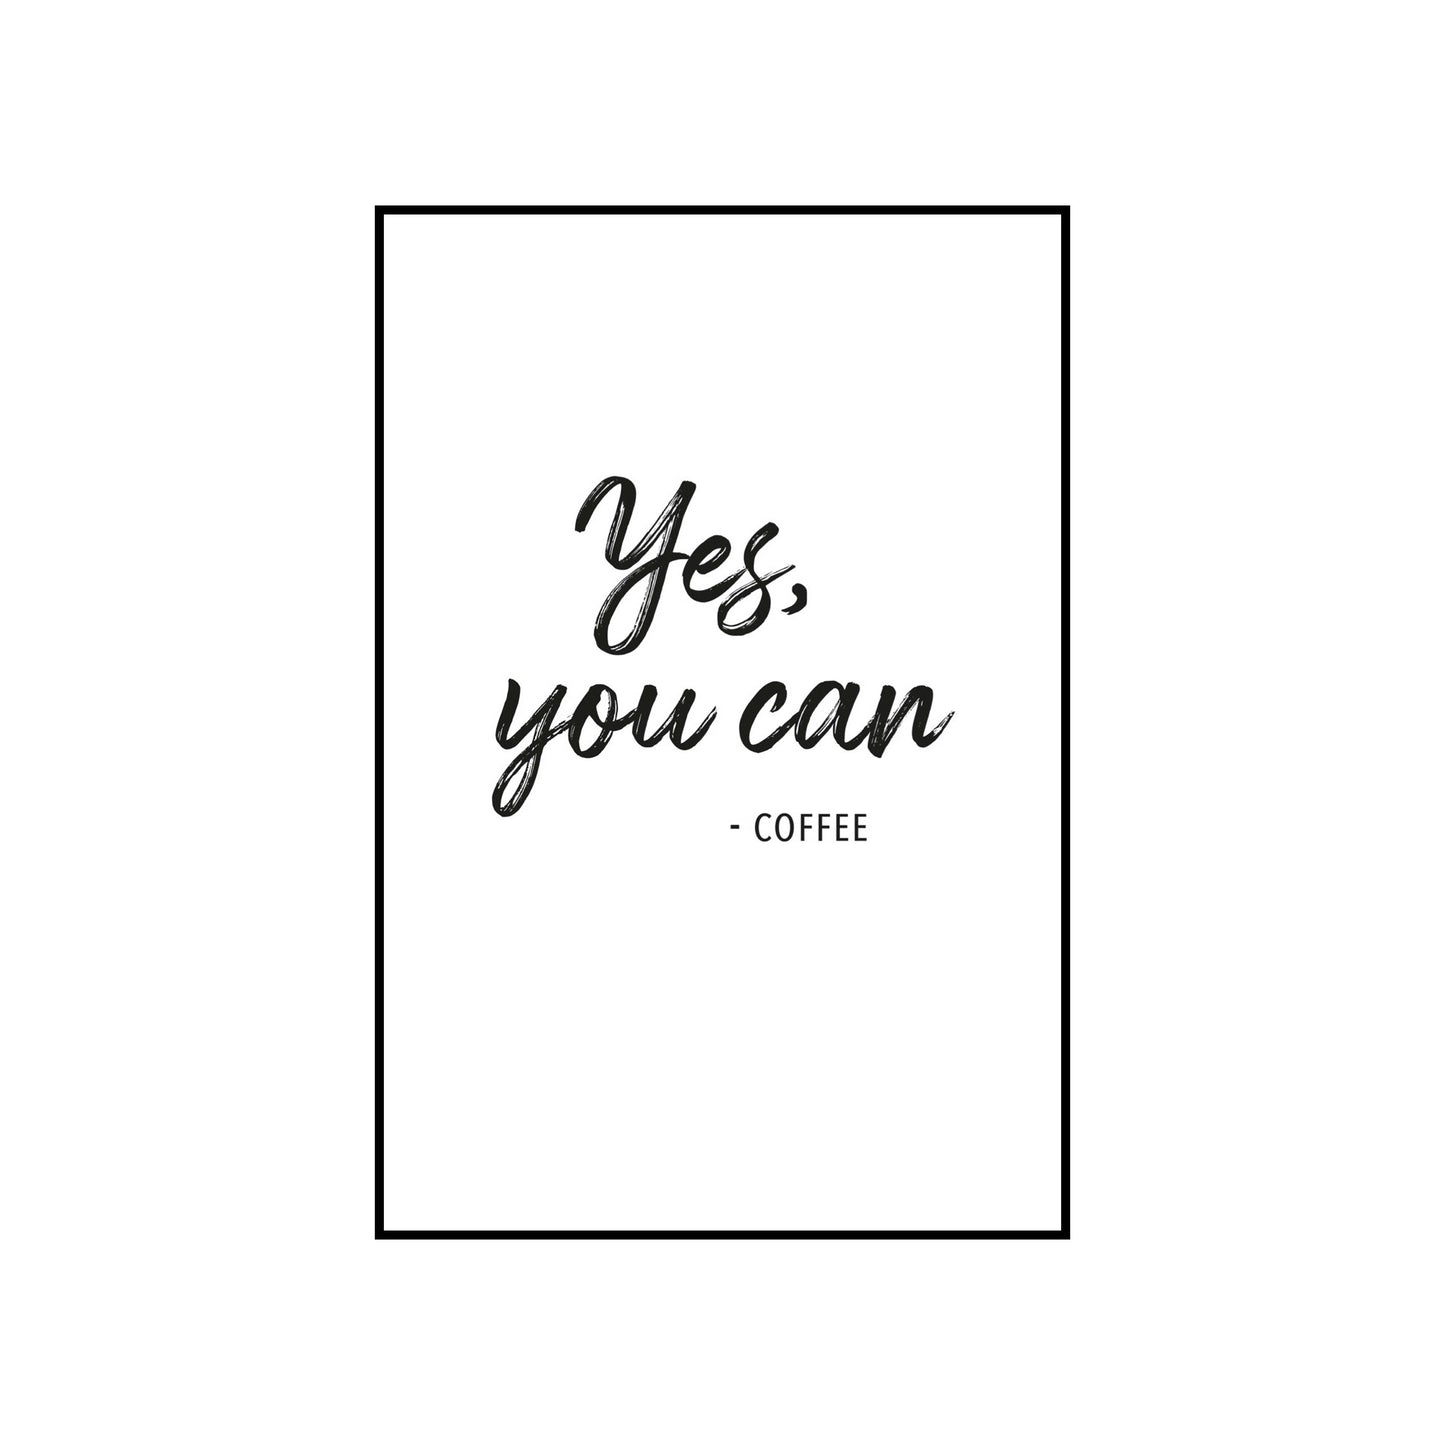 Yes you can - coffee